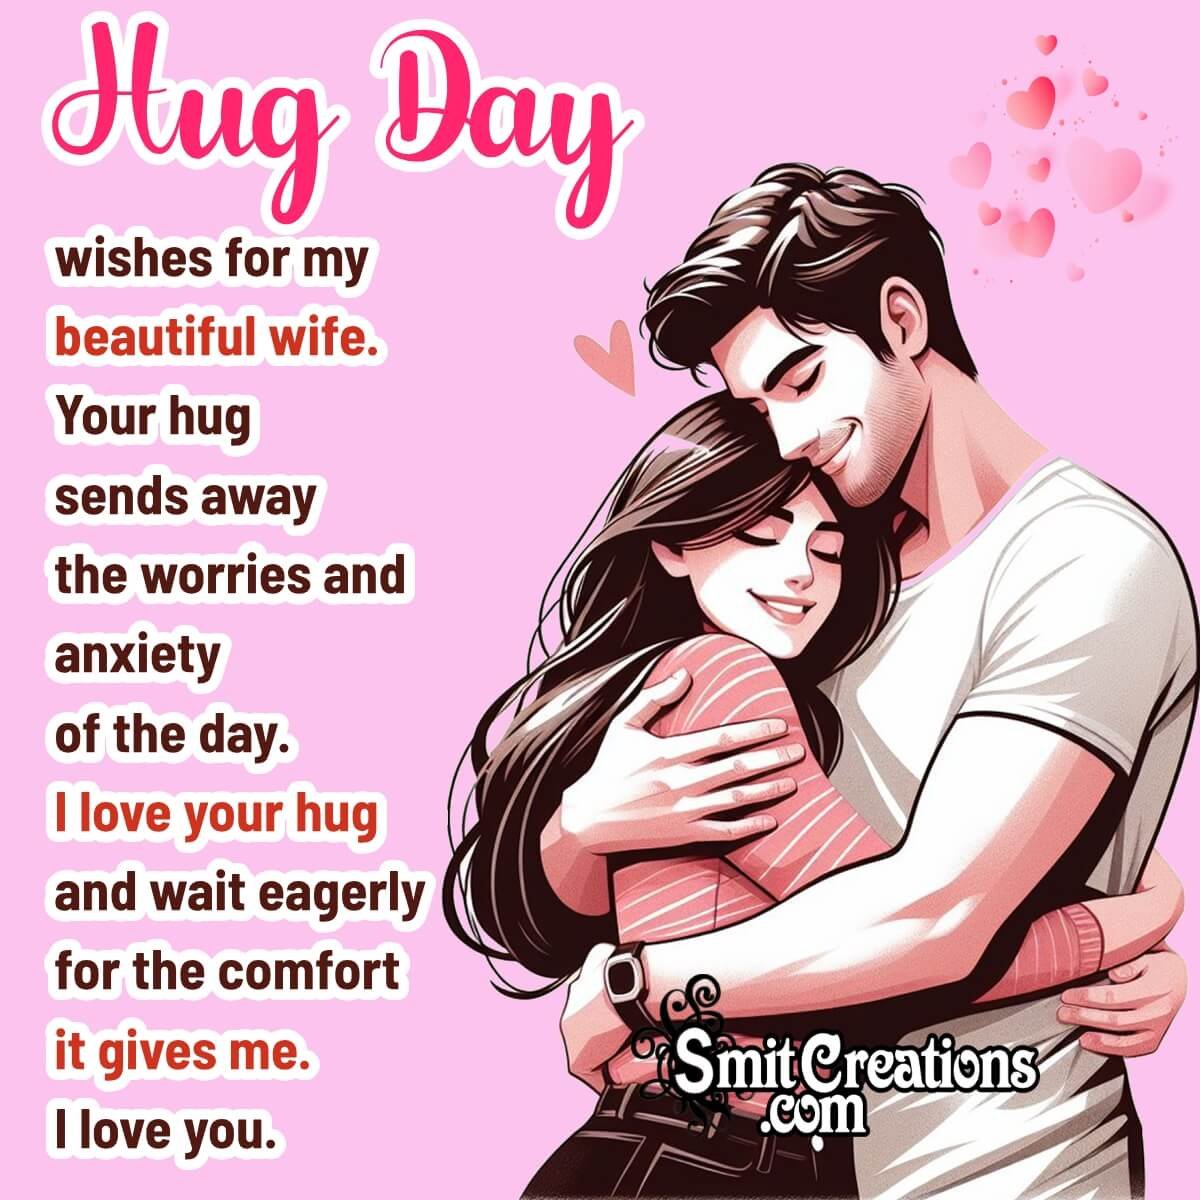 Happy Hug Day Wishes For Wife